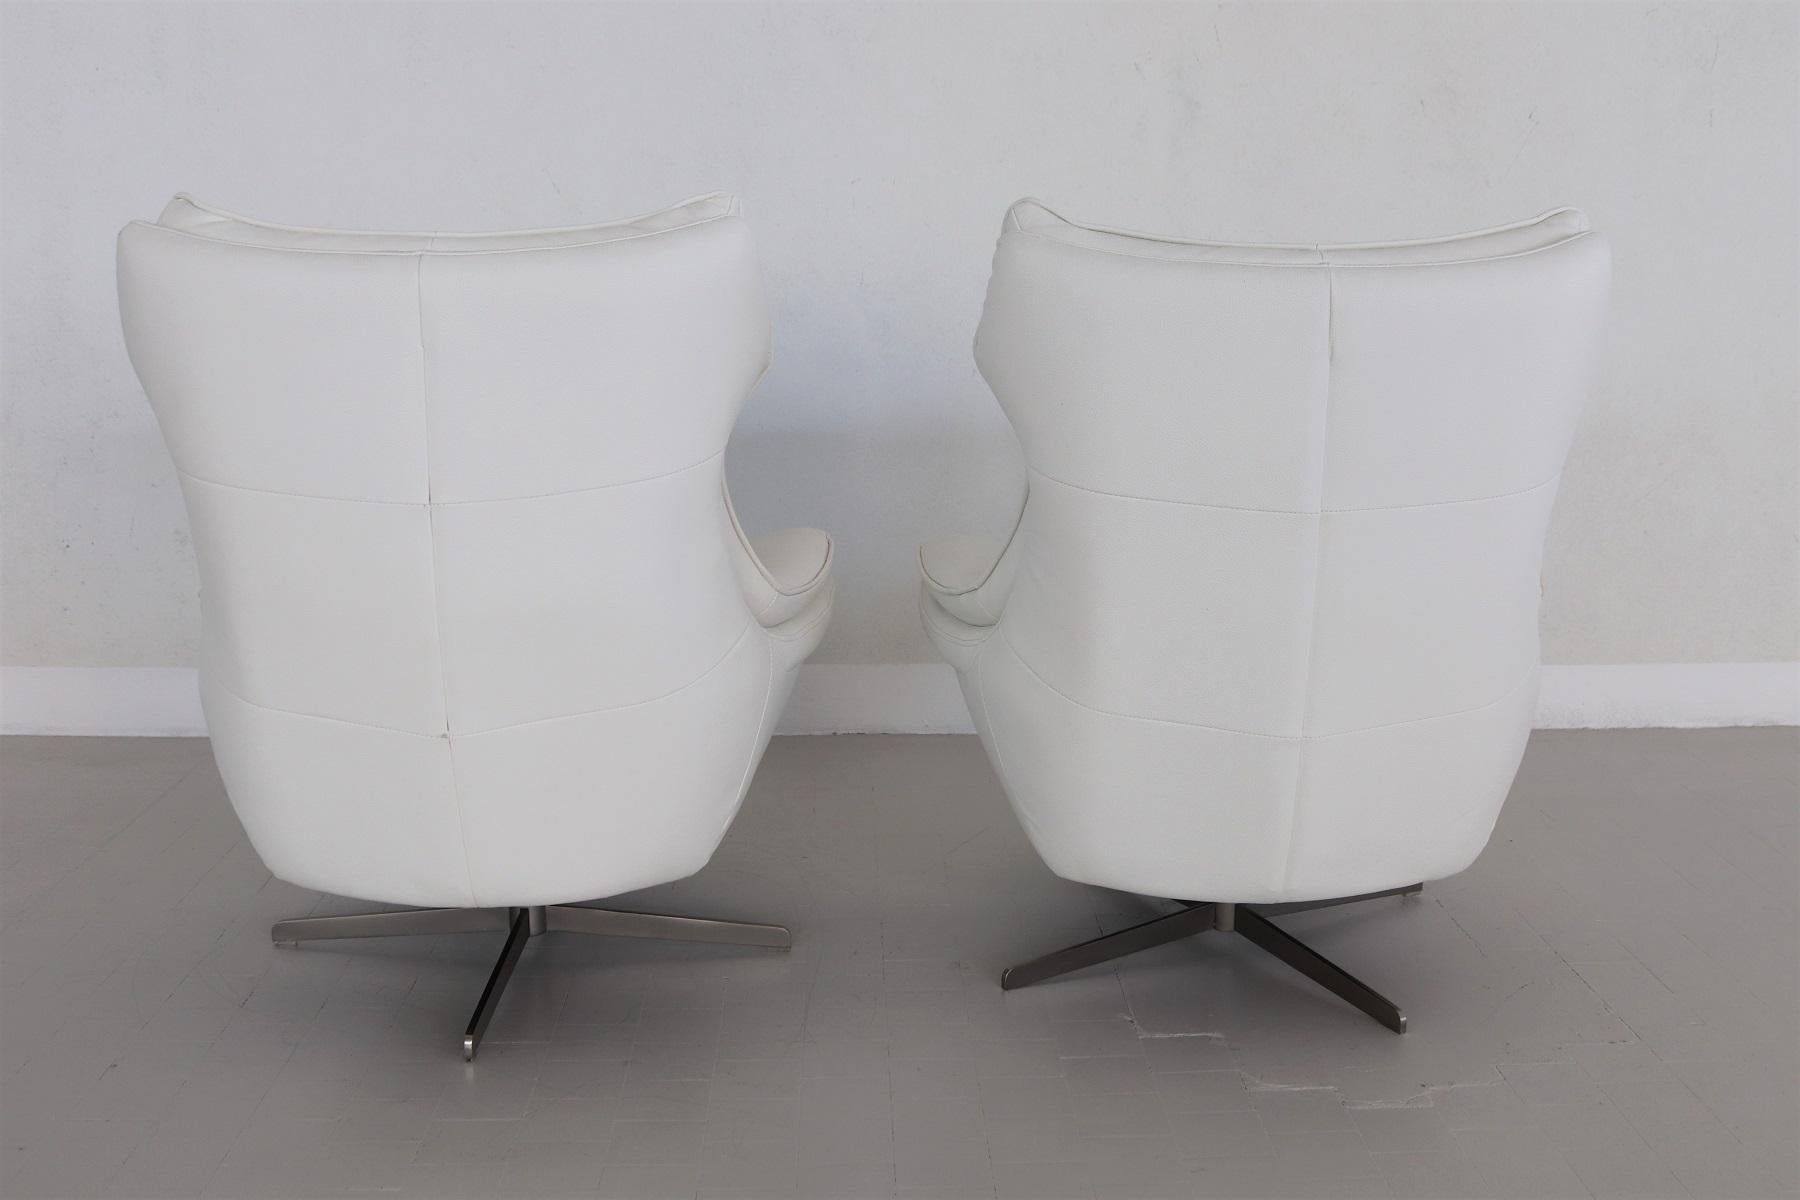 Italian Midcentury Swivel Armchairs in White Leather, 1980s For Sale 1